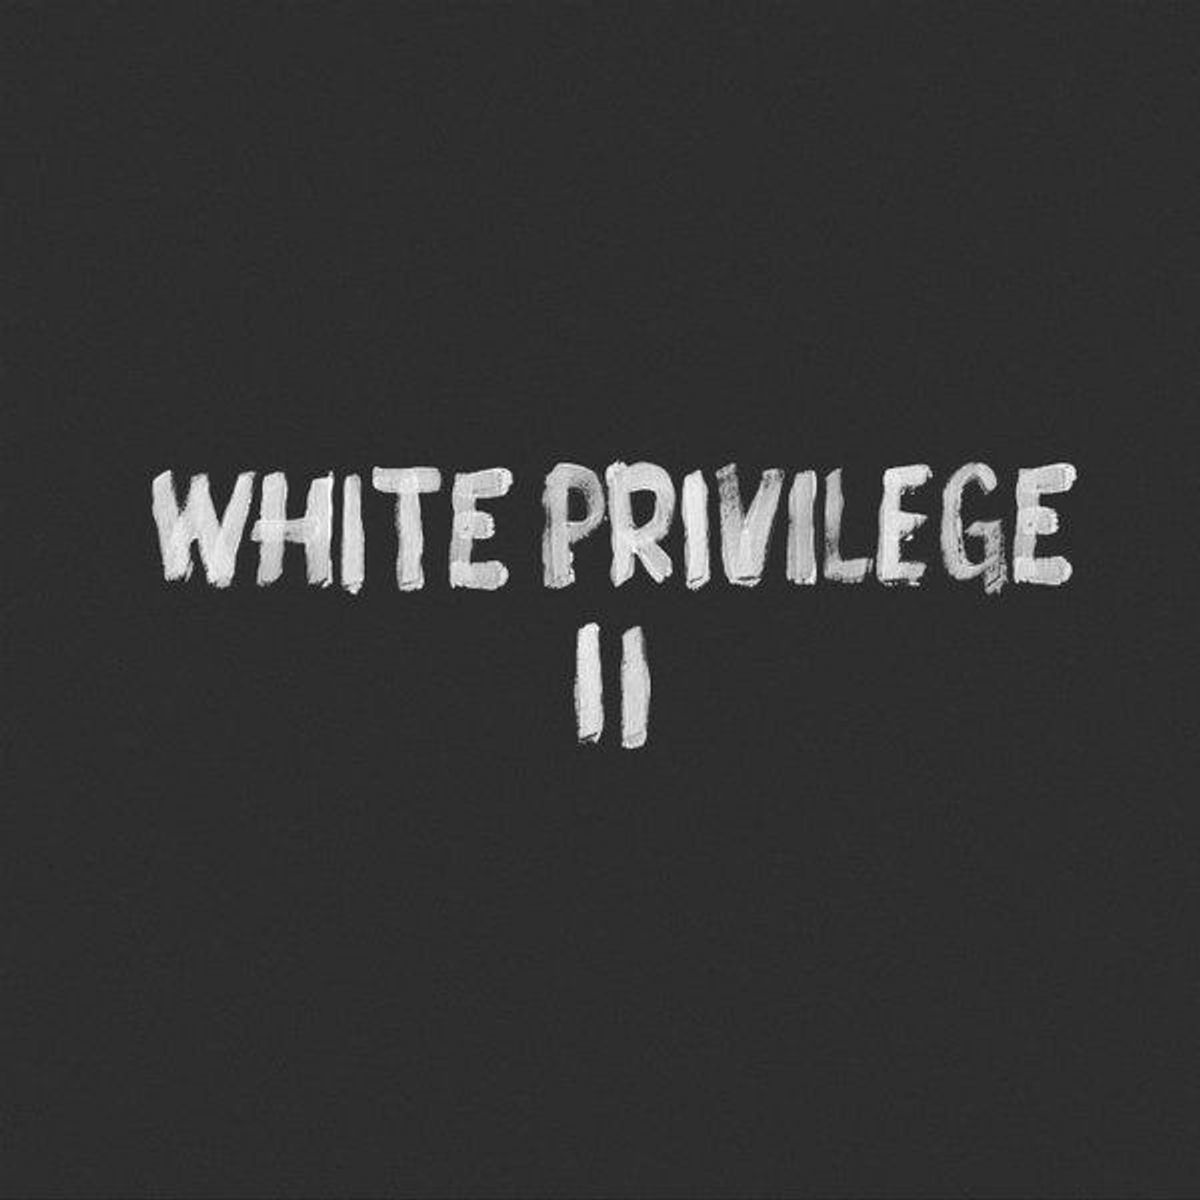 Macklemore's New Song About White Privilege - Will It Accomplish Anything?